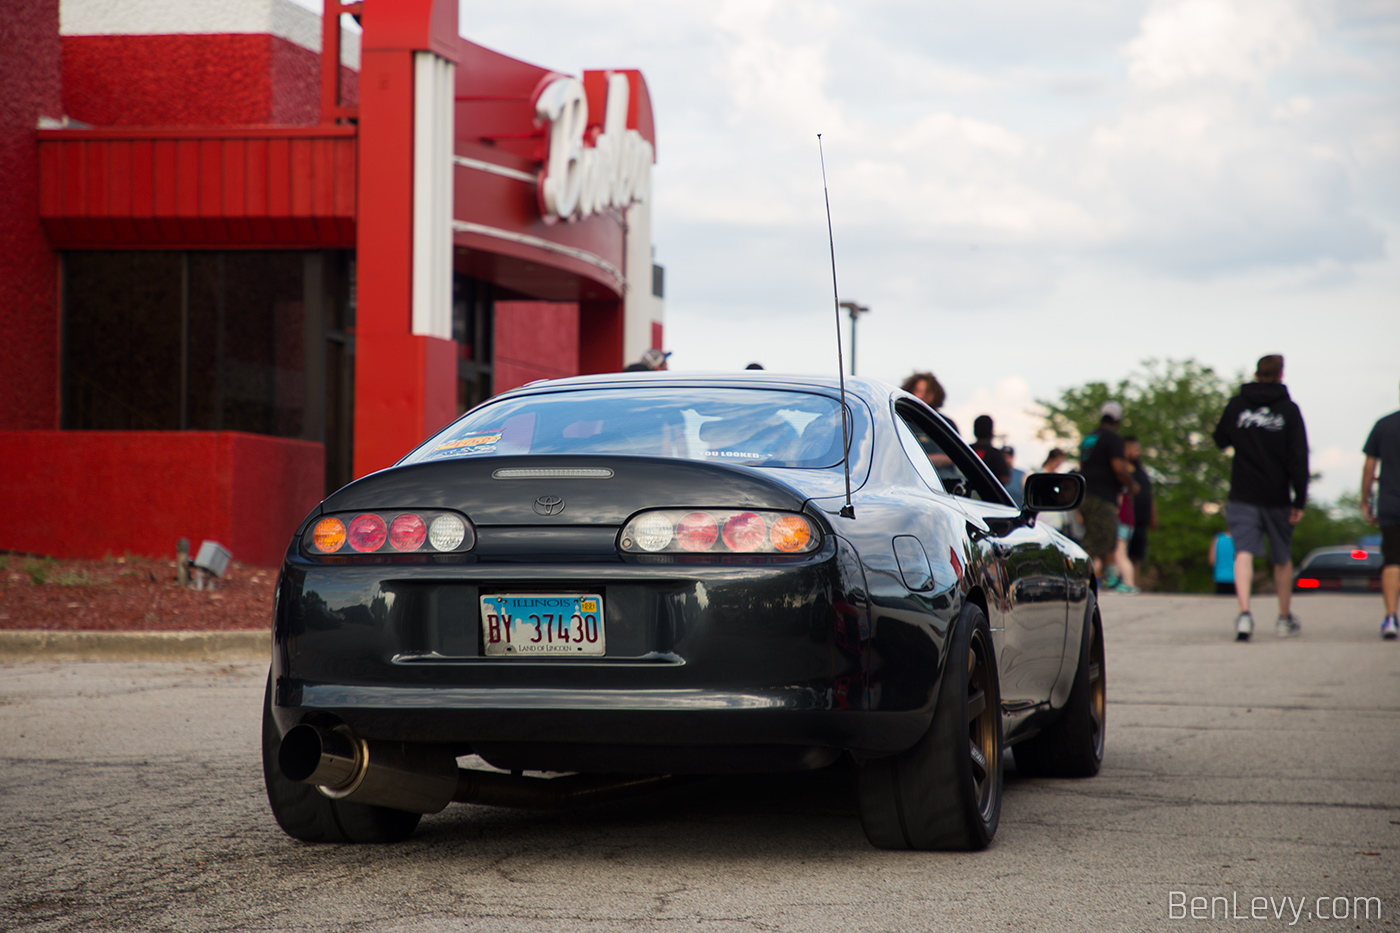 Meaty Tires on a Black Toyota Supra